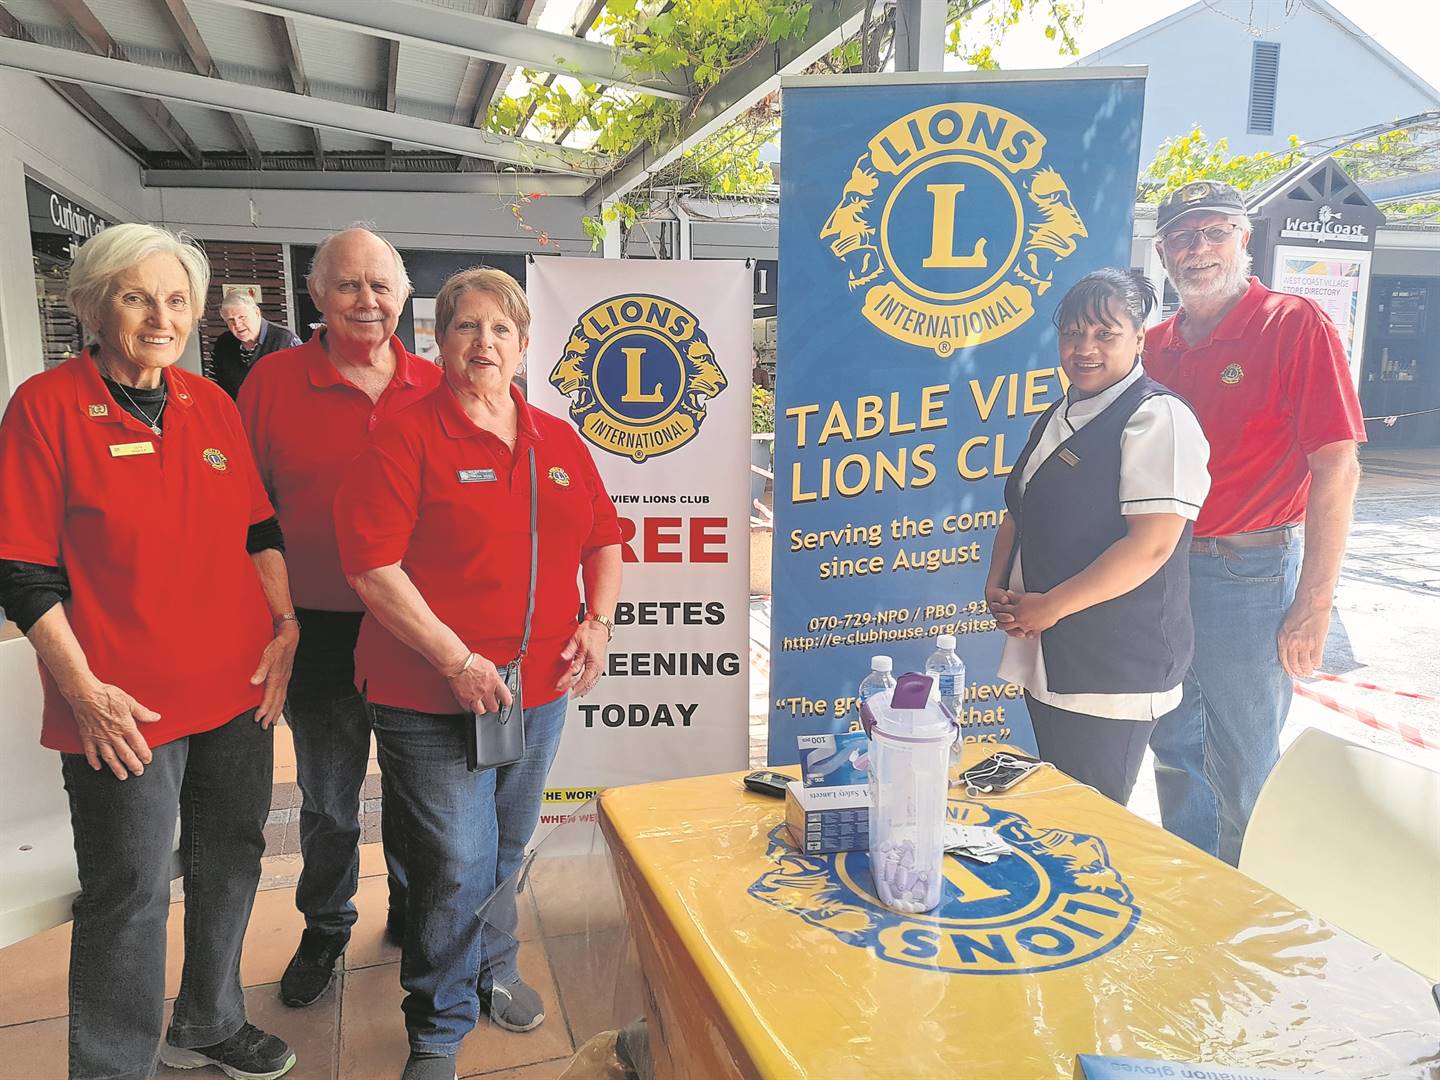 The Table View Lions at their free diabetes screening at West Coast Village in Sunningdale. Pictured from left are Jane Sadler, Rocky Wright (president), Freda Dodd, Natasha Daniels and John Houston.PHOTO: Kailin Daniels